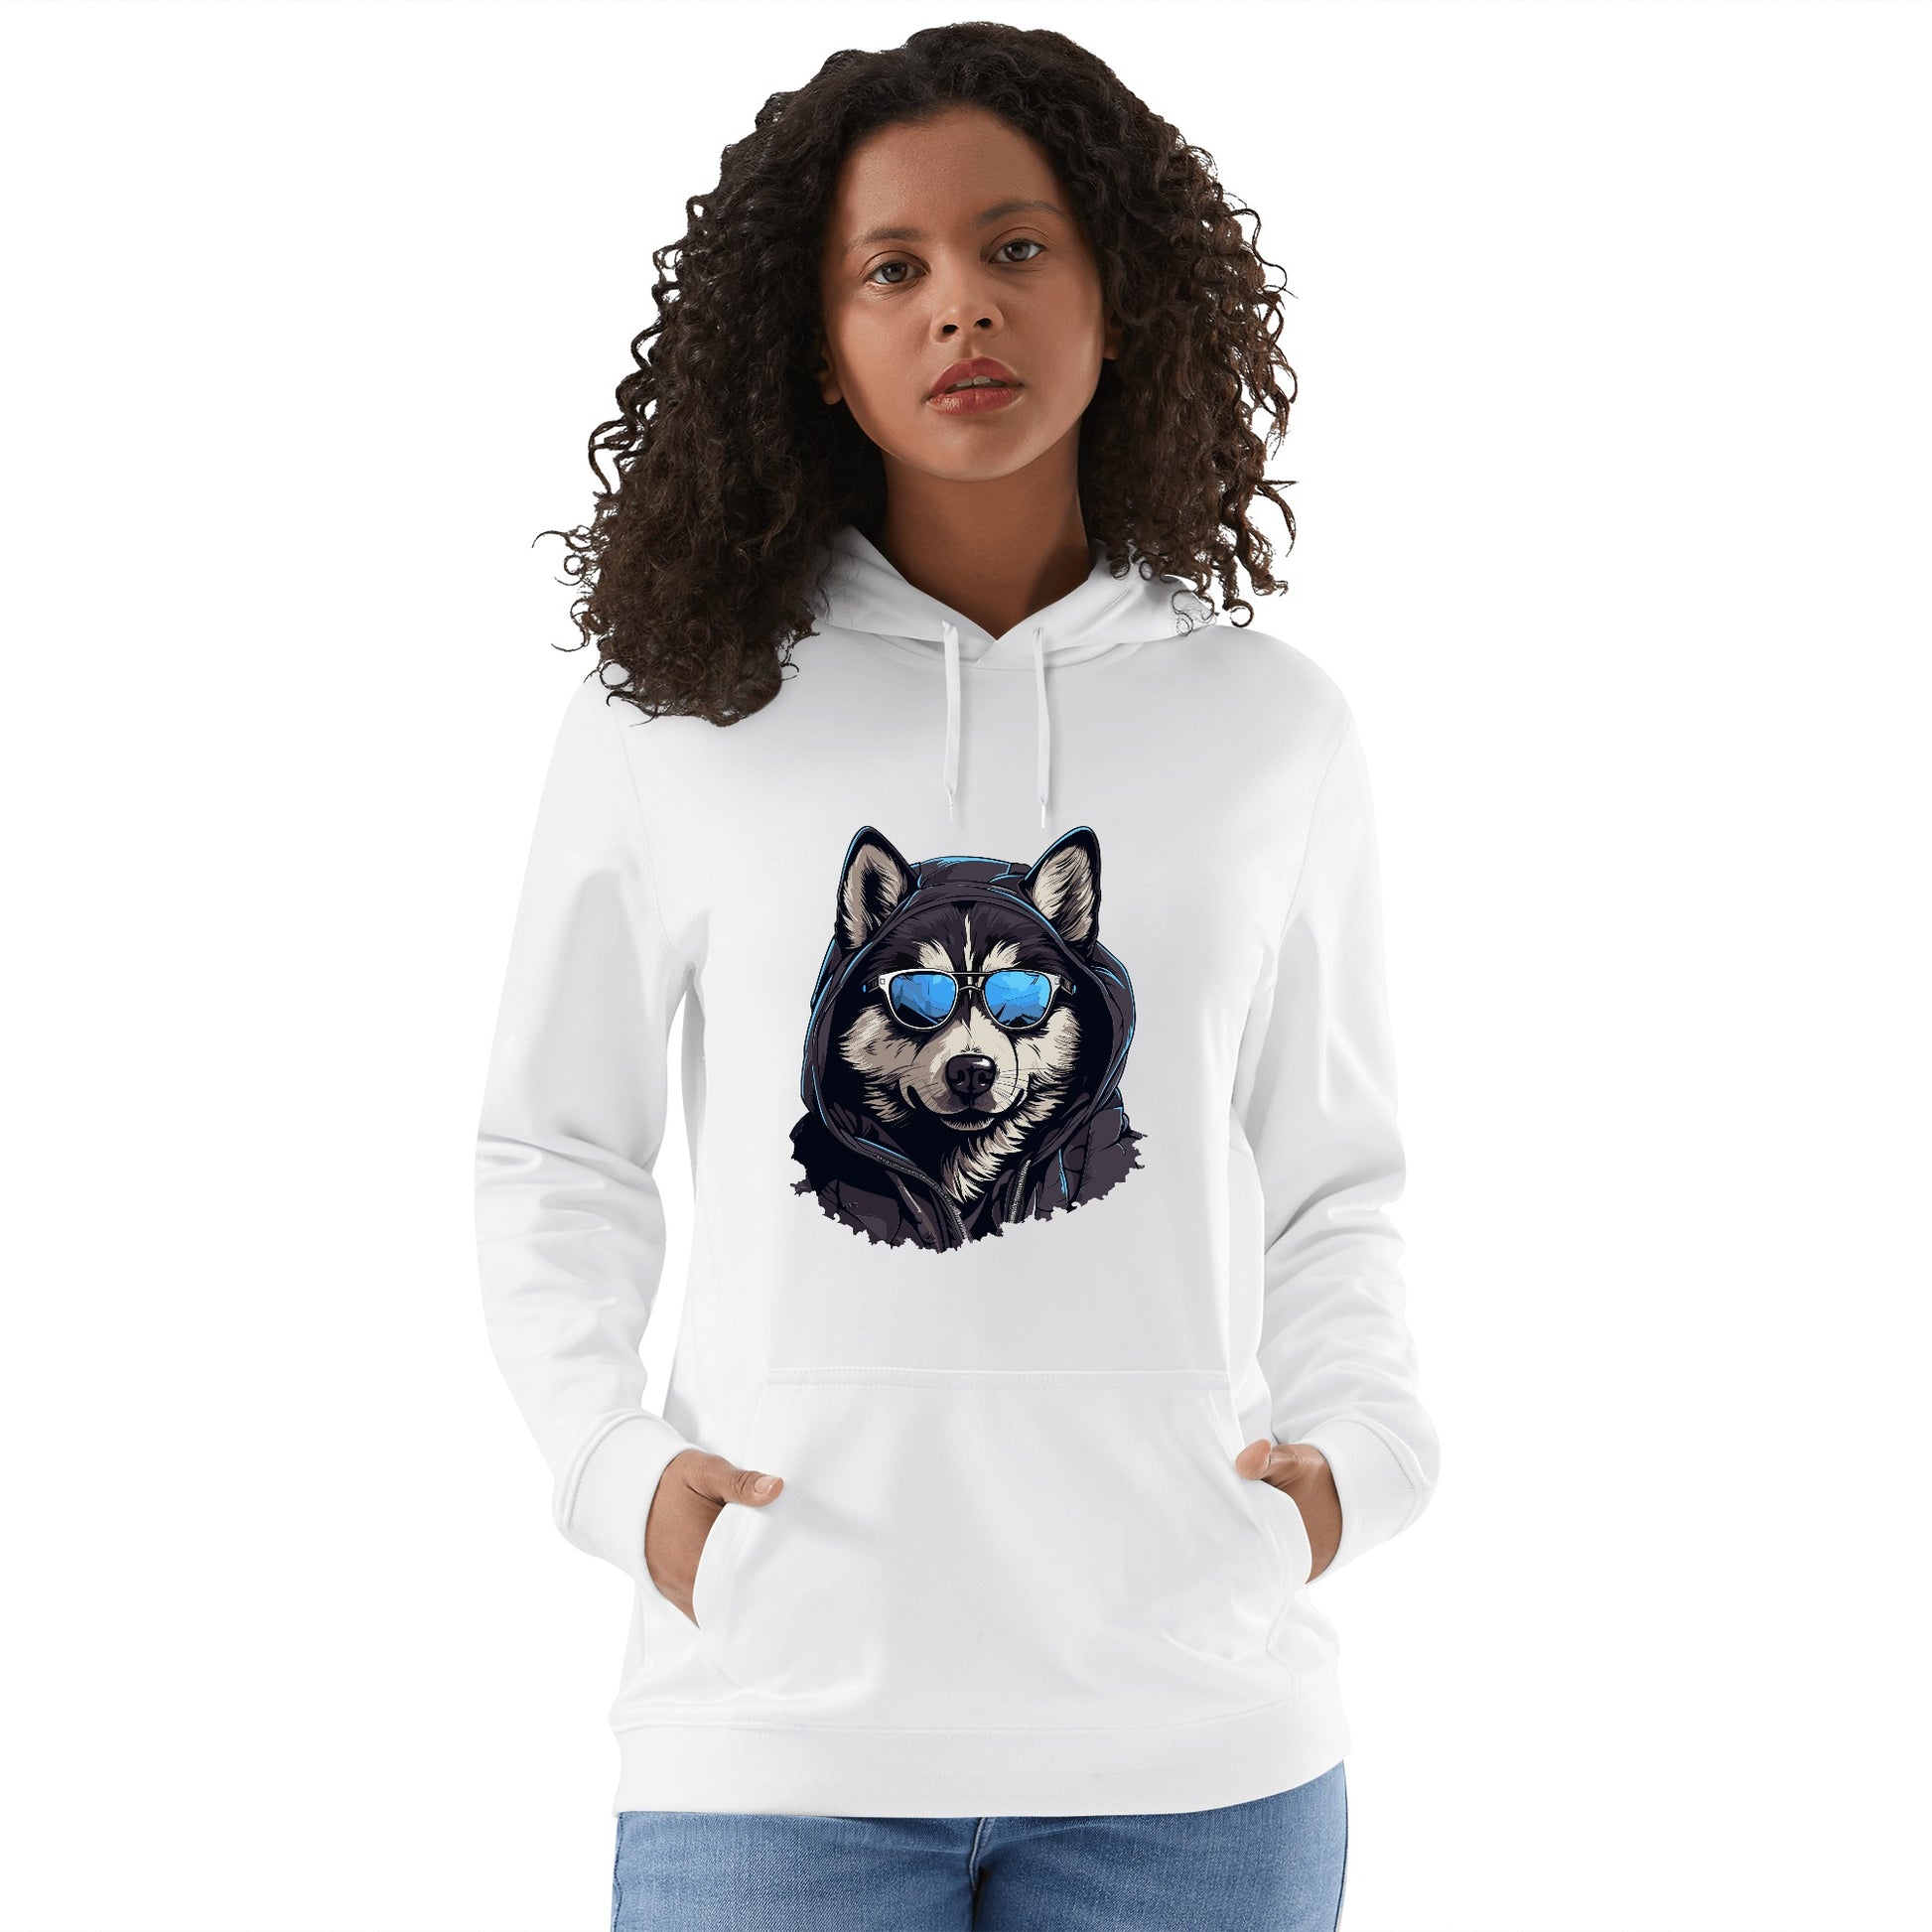 Unisex Front & Back Printing Cotton Hoodie 